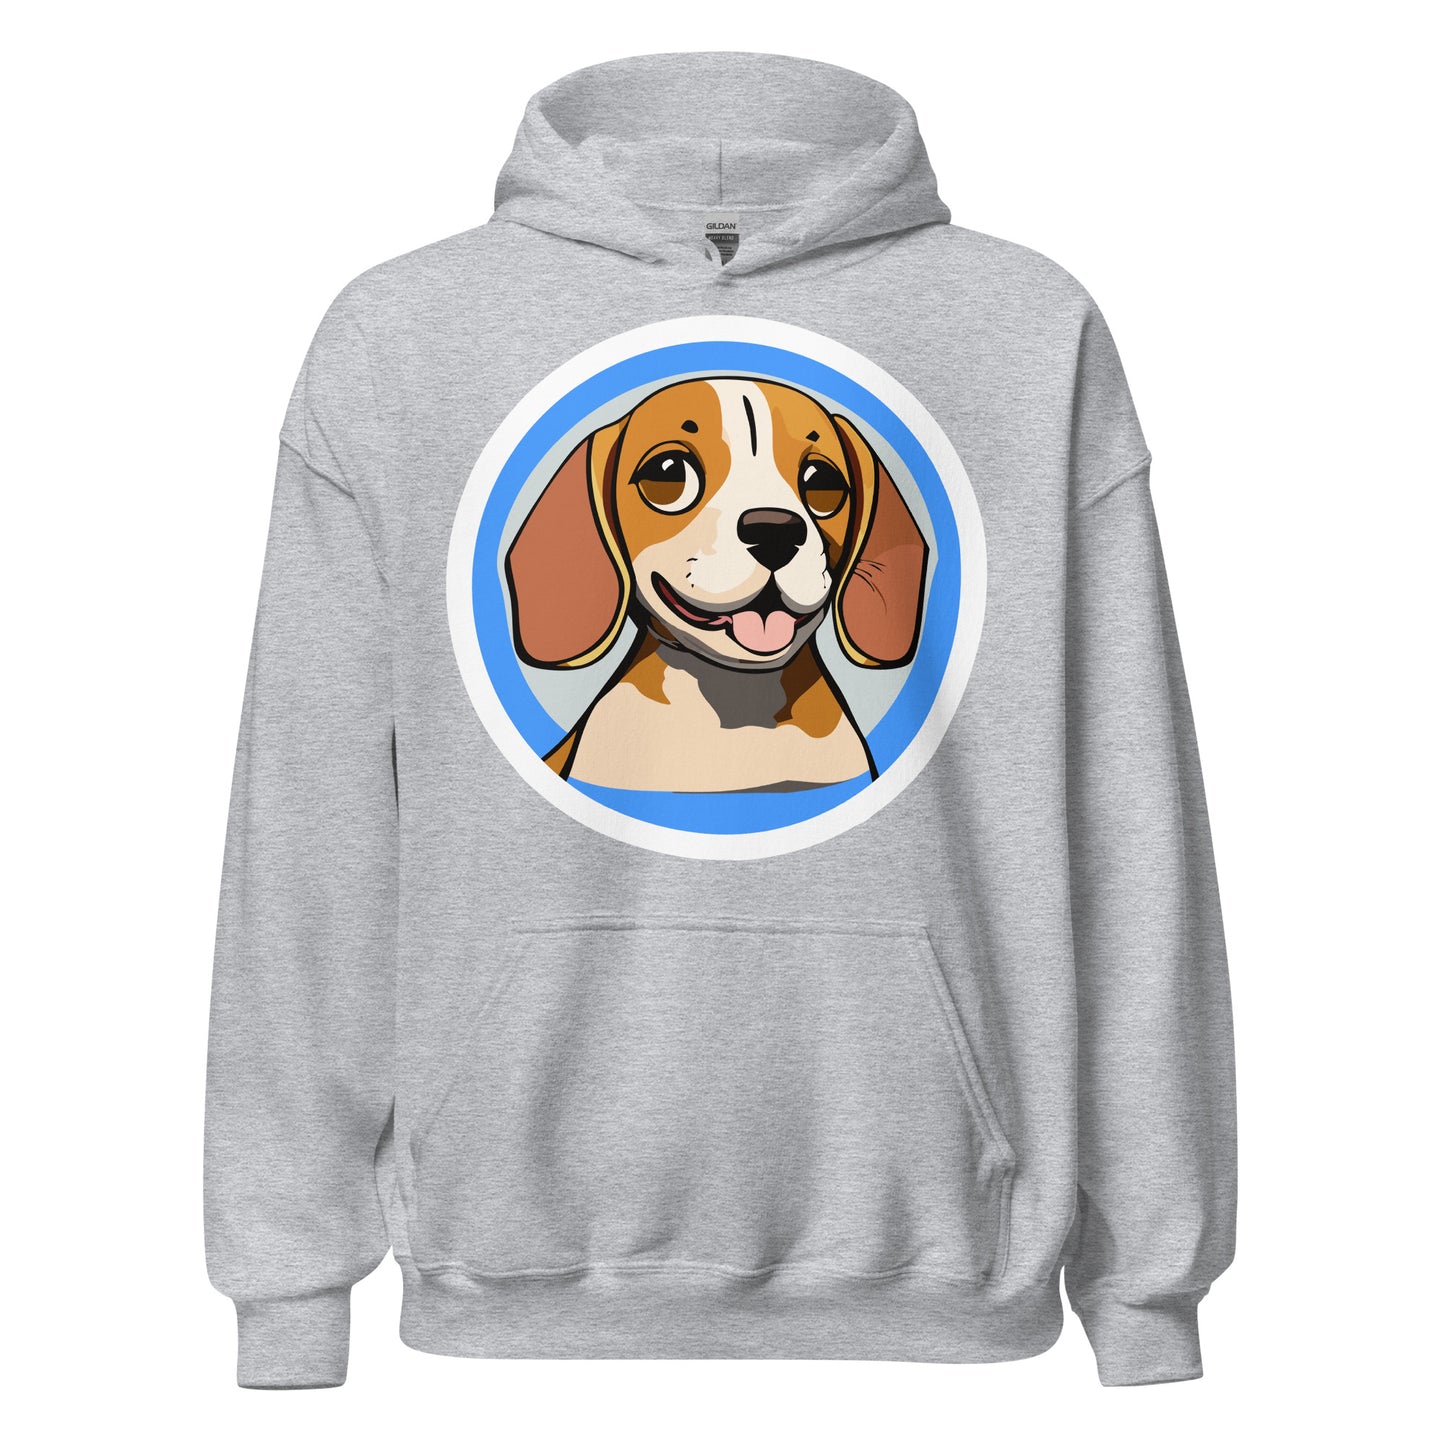 Comfy unisex hoodie for him or her with a cute beagle image, in grey